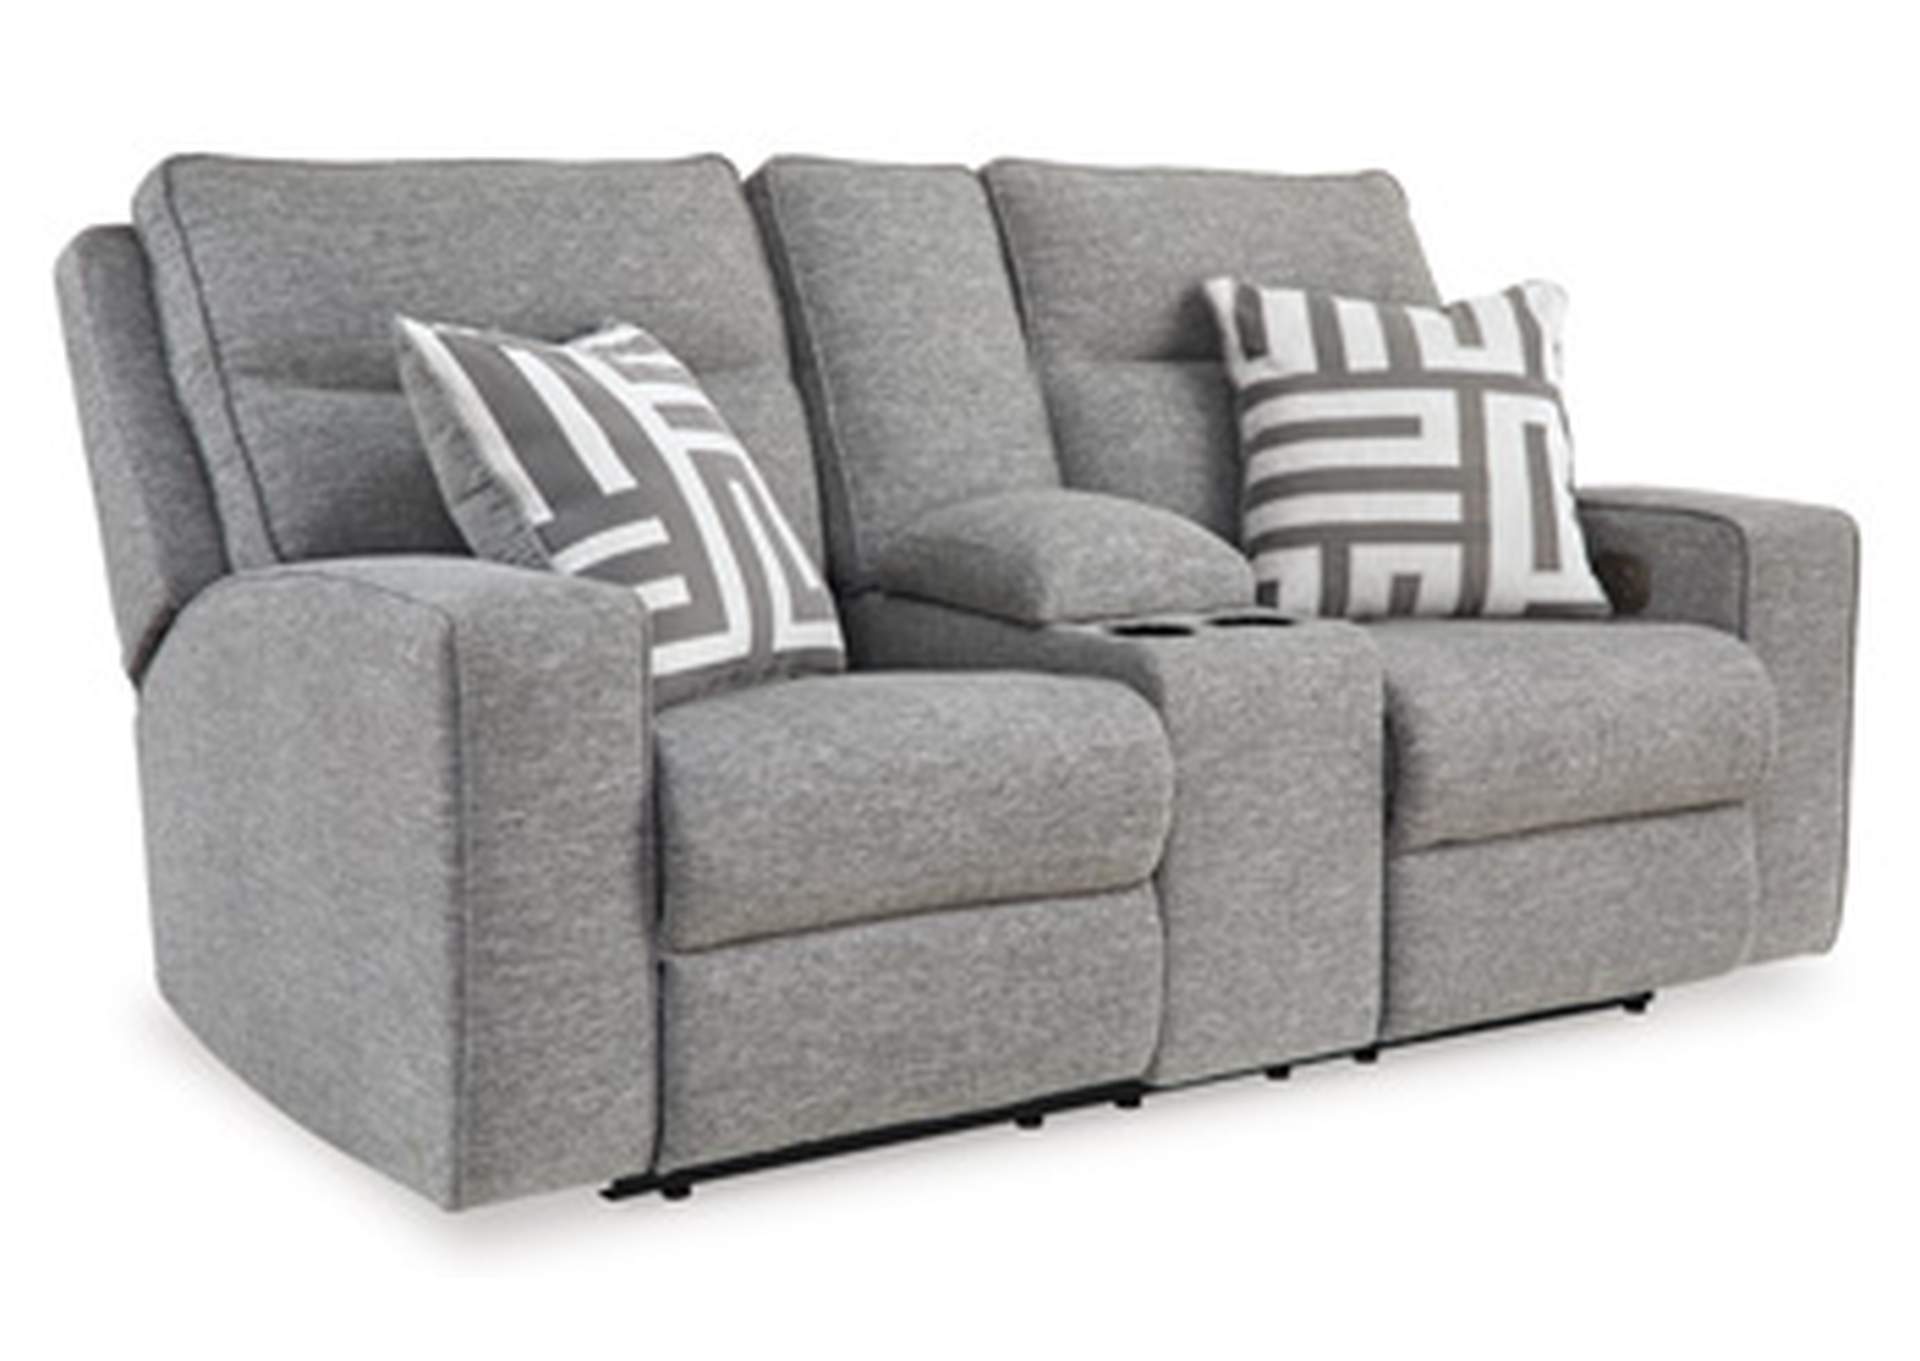 Biscoe Power Reclining Loveseat,Signature Design By Ashley